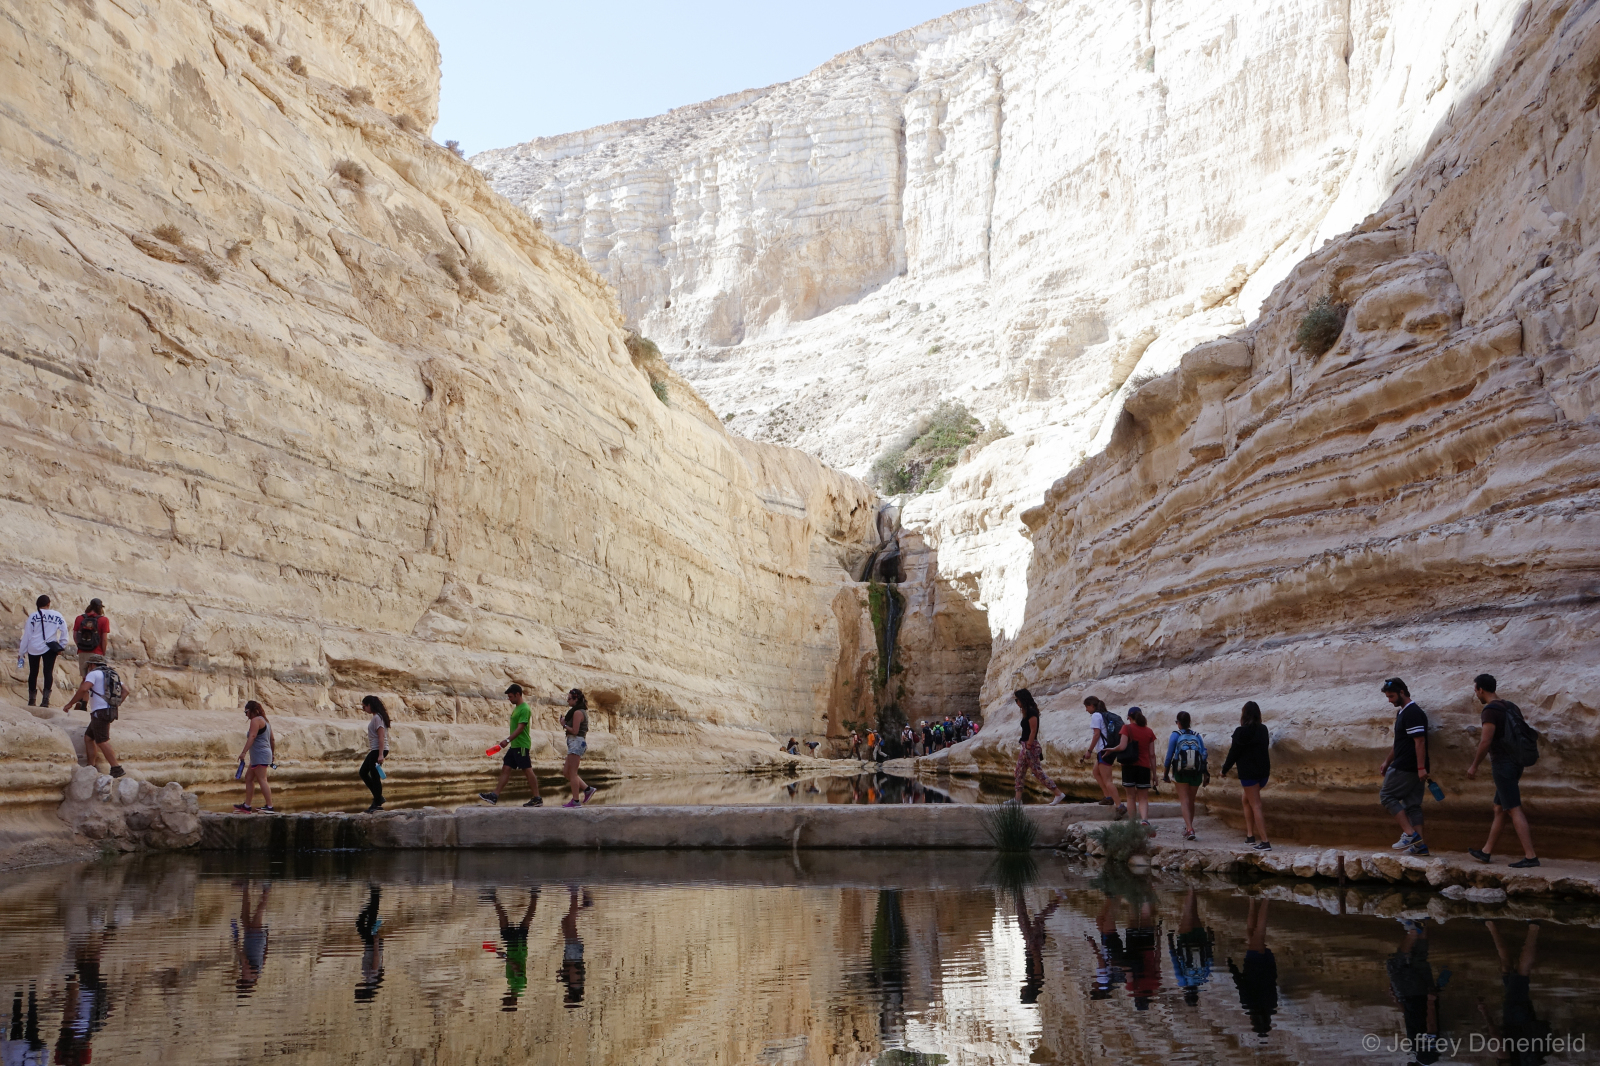 Waterfalls are a rare treat in the desert canyons of Southern Israel.